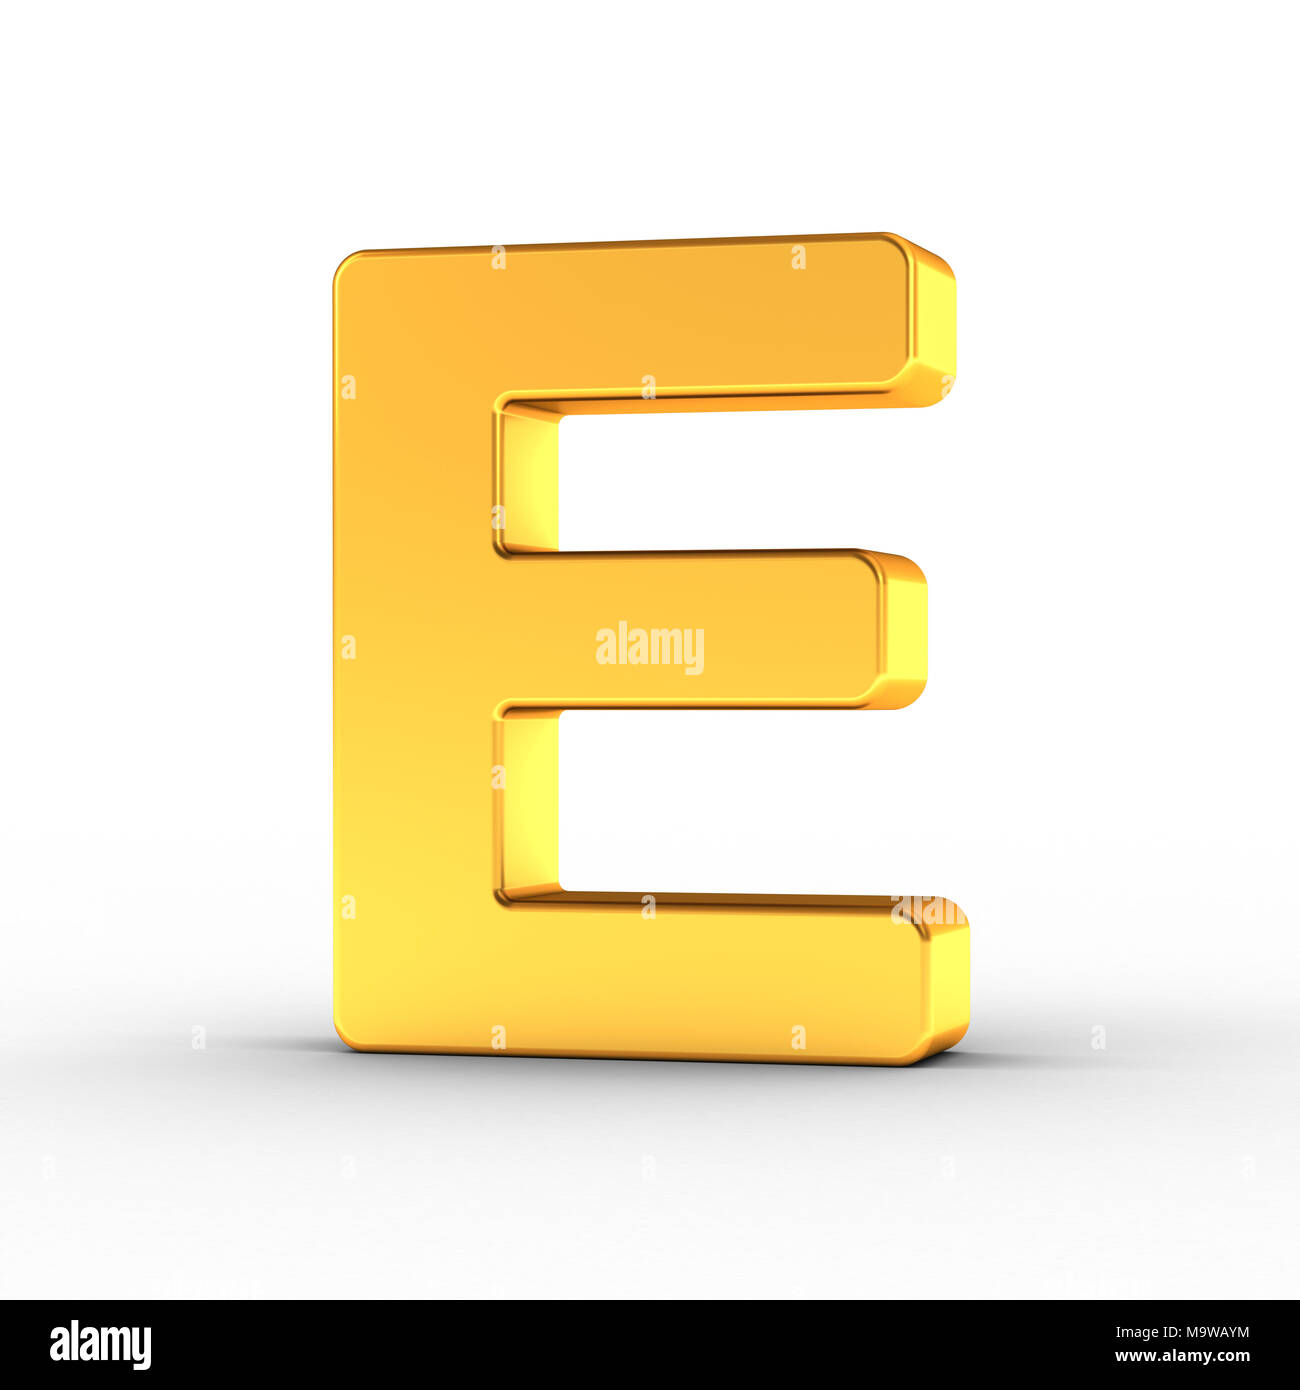 The Letter E as a polished golden object over white background with clipping path for quick and accurate isolation. Stock Photo